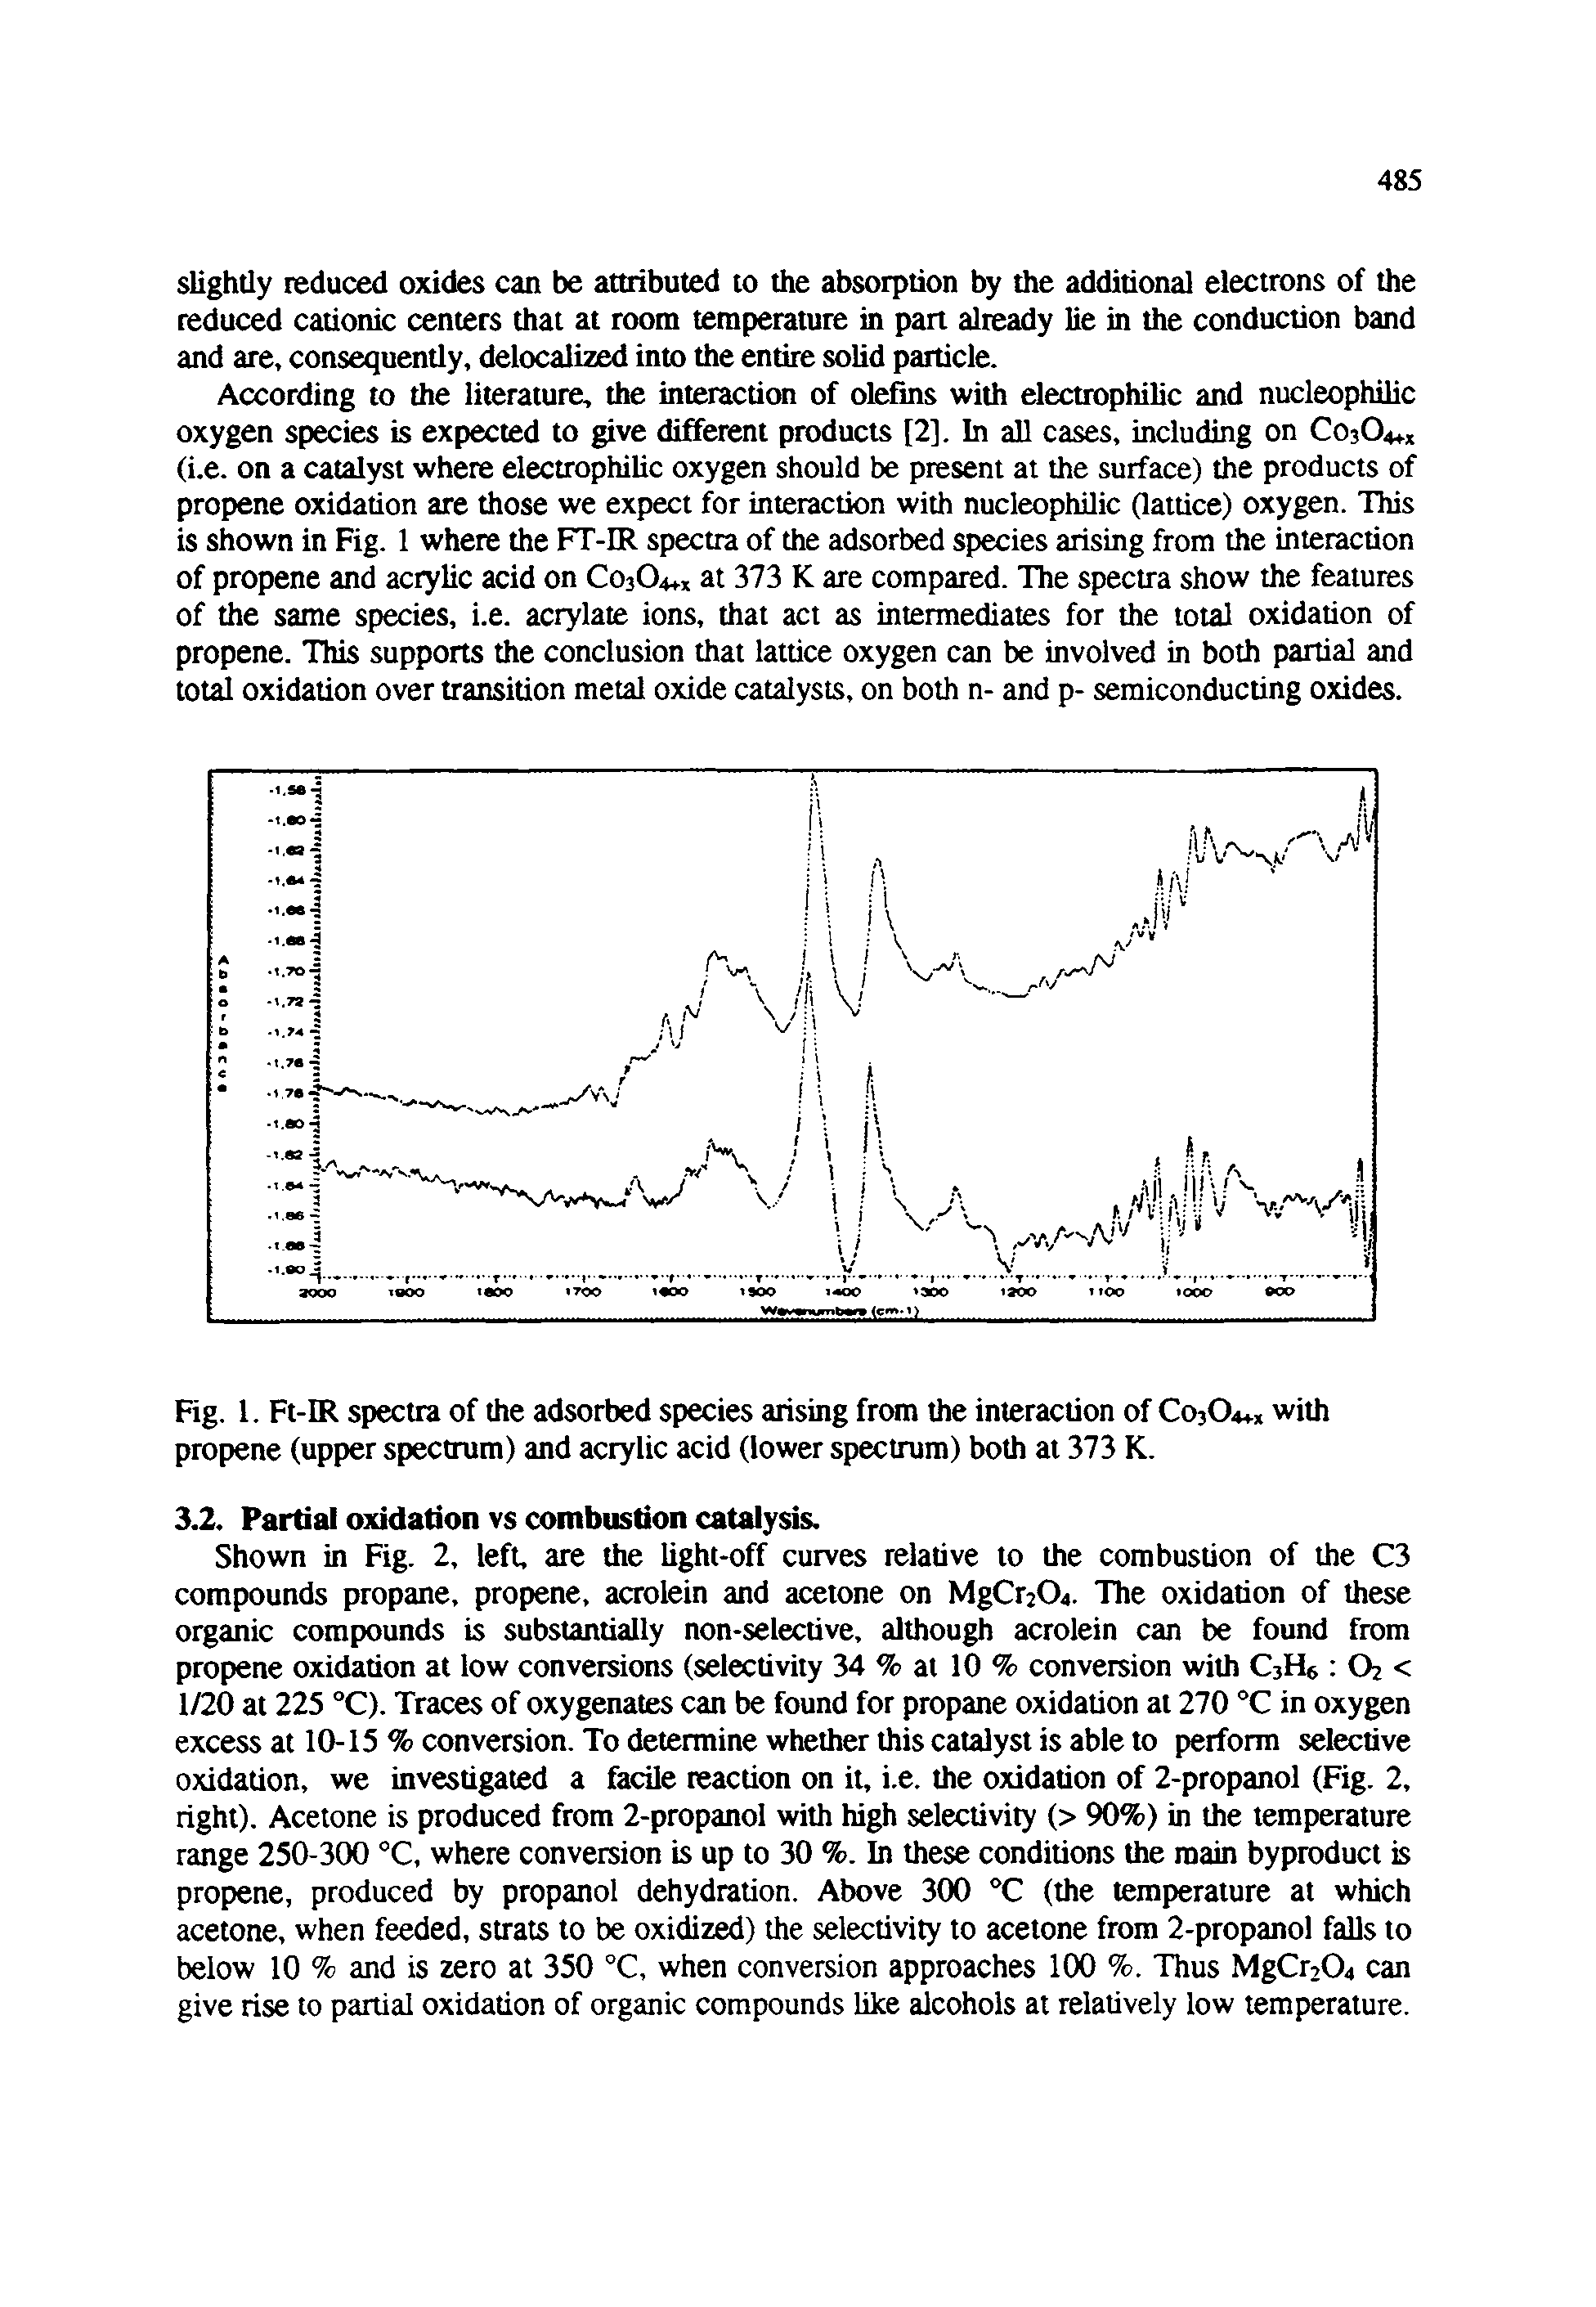 Fig. 1. Ft-ER spectra of the adsorbed species arising from the interaction of C03O4+X with propene (upper spectrum) and acrylic acid (lower spectrum) both at 373 K.